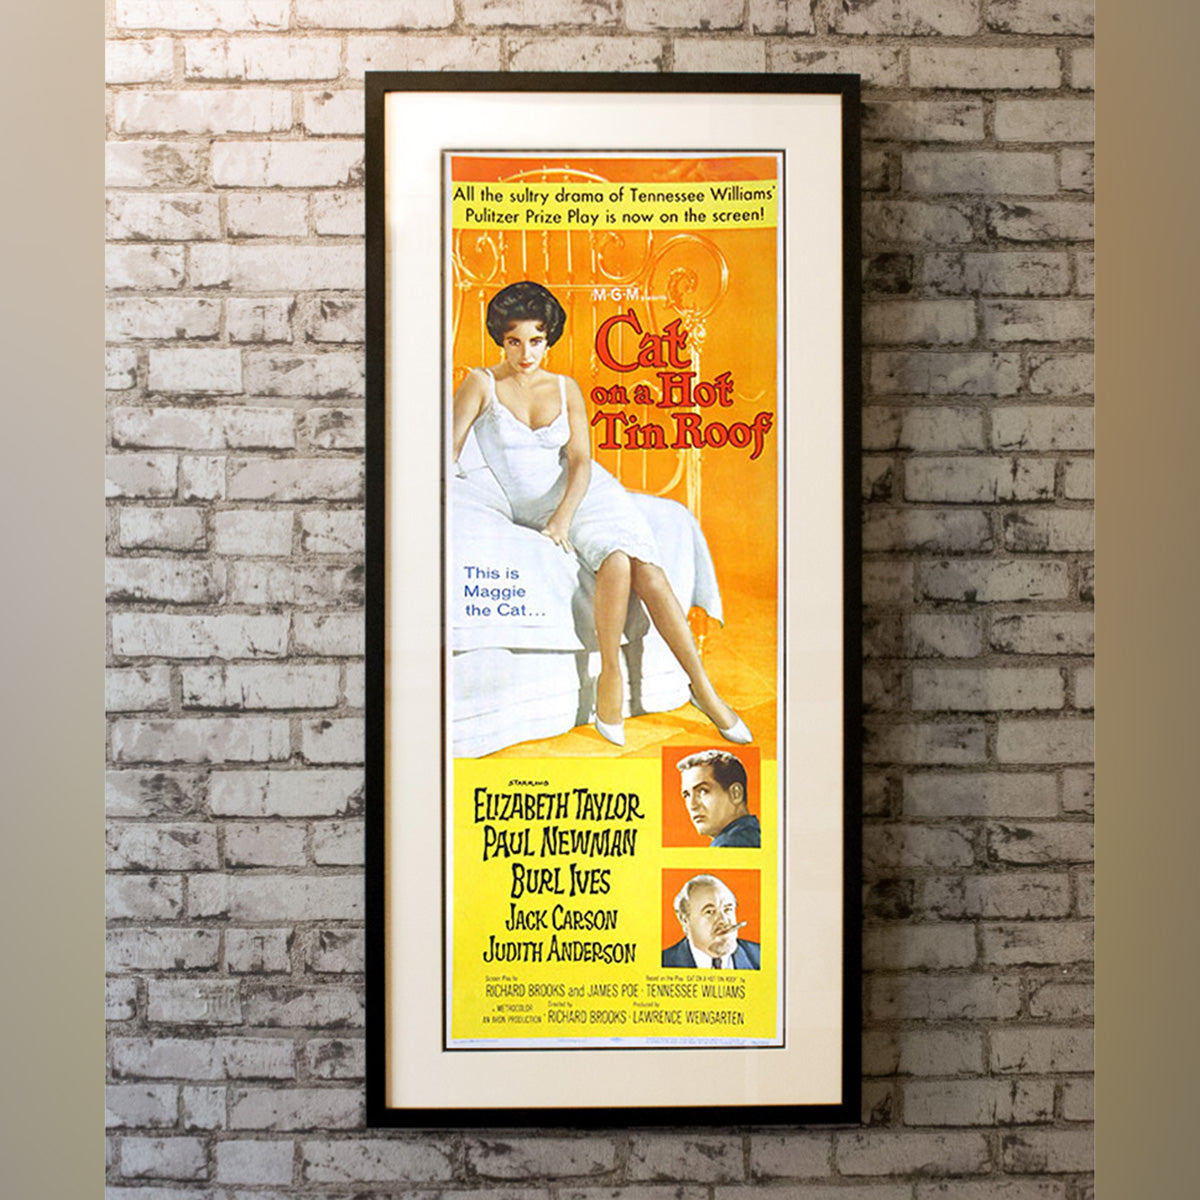 Original Movie Poster of Cat On A Hot Tin Roof (1958)